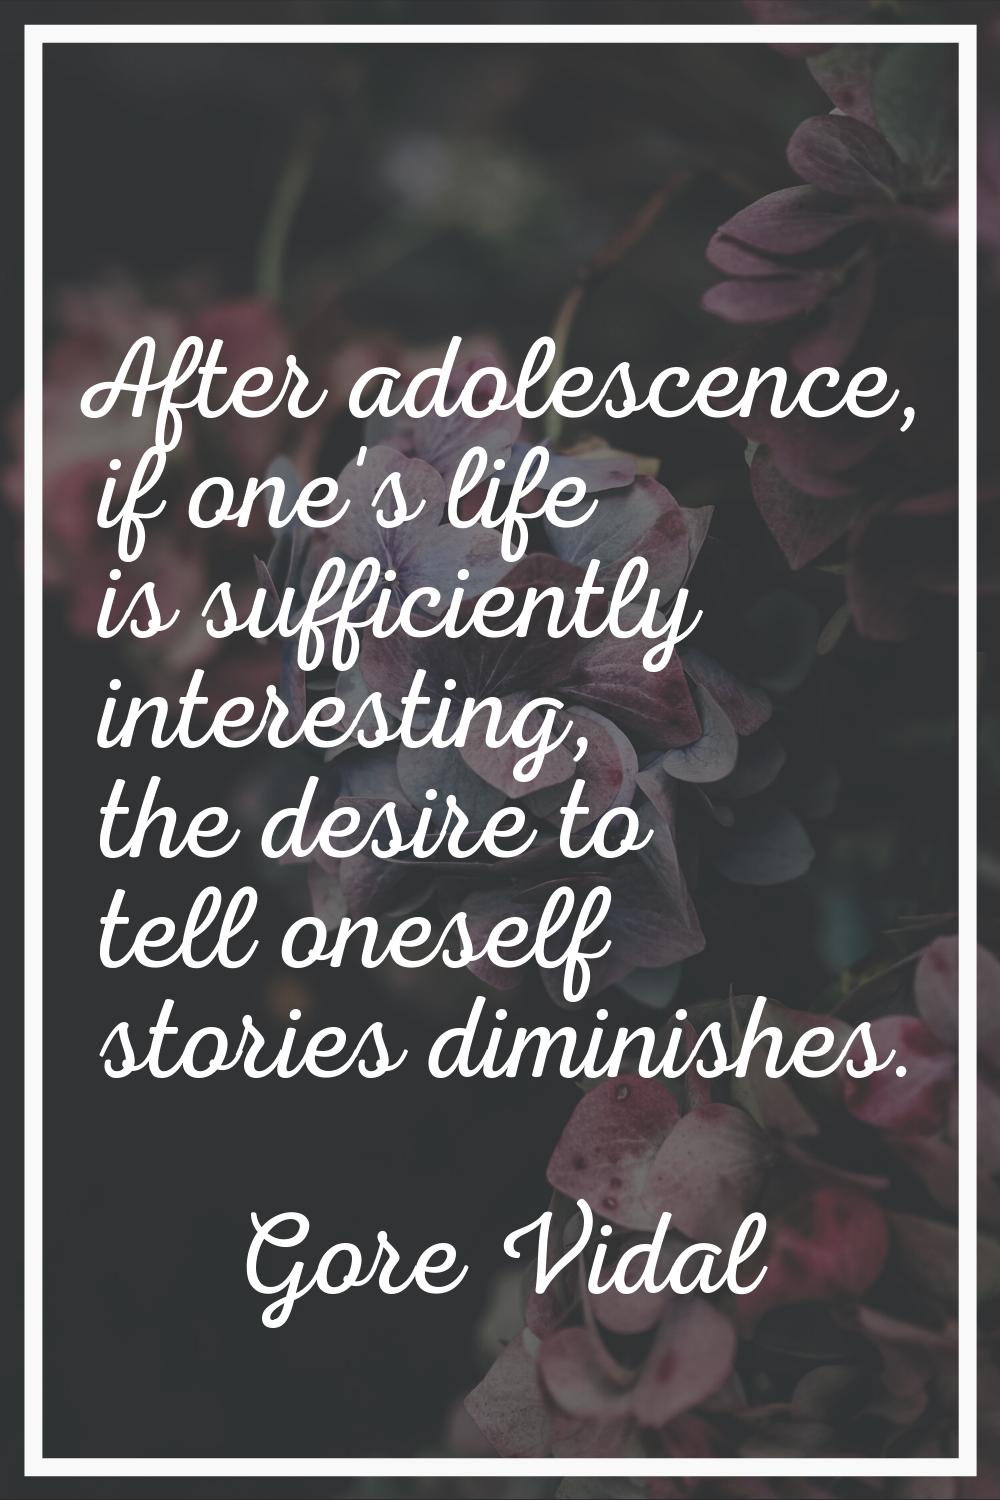 After adolescence, if one's life is sufficiently interesting, the desire to tell oneself stories di